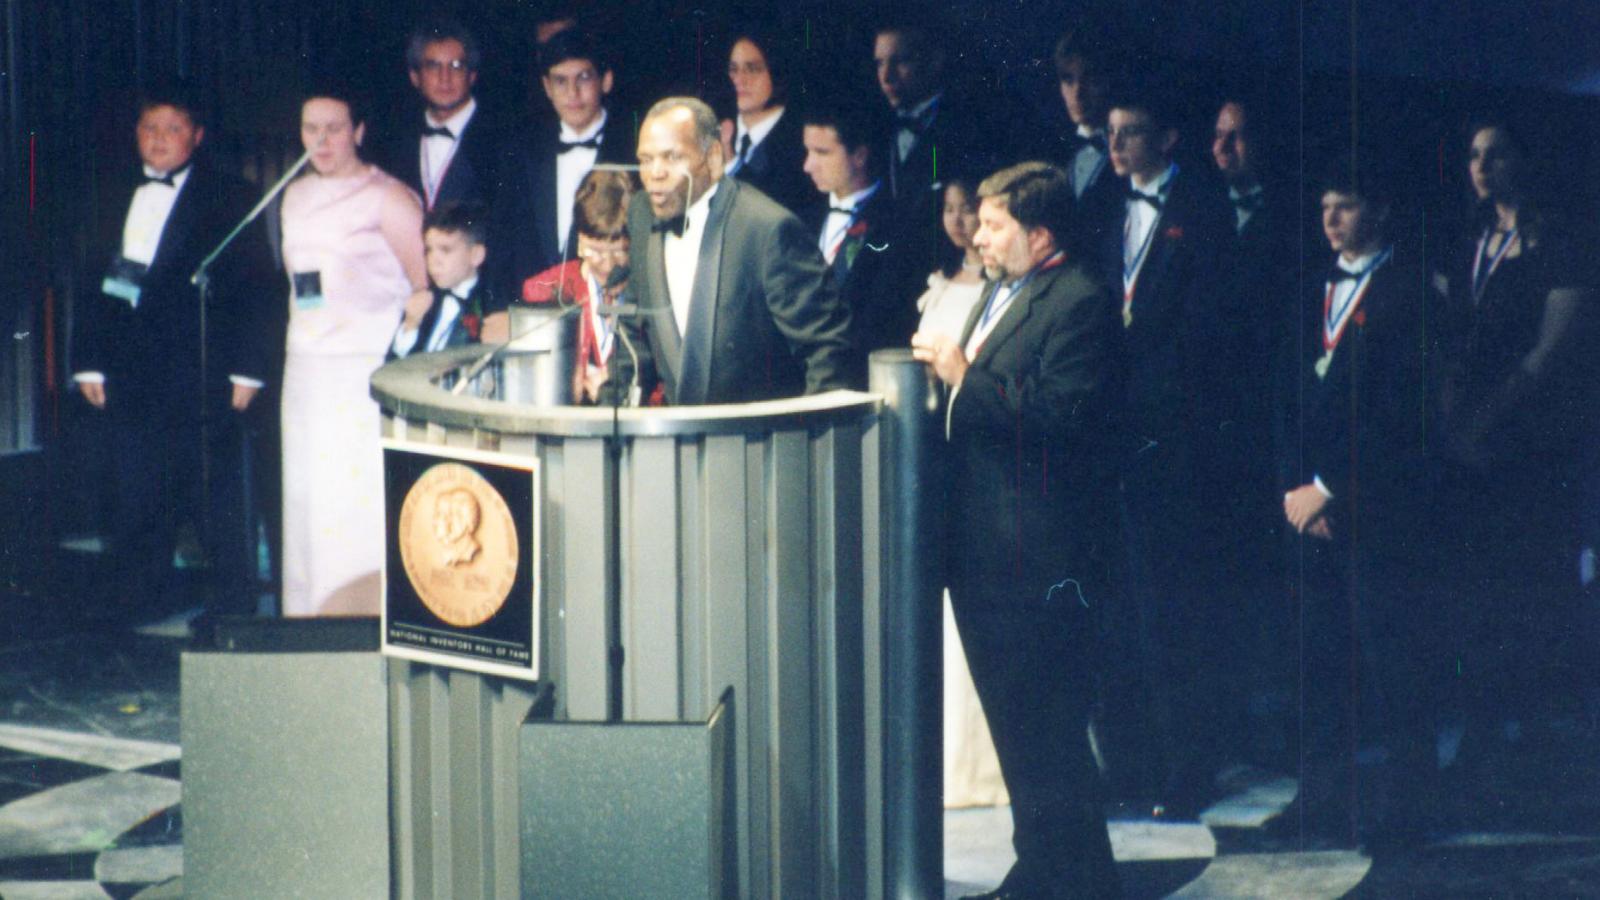 Danny Glover, Steve Wozniak, 2000 Induction of the National Gallery for America's Young Inventors